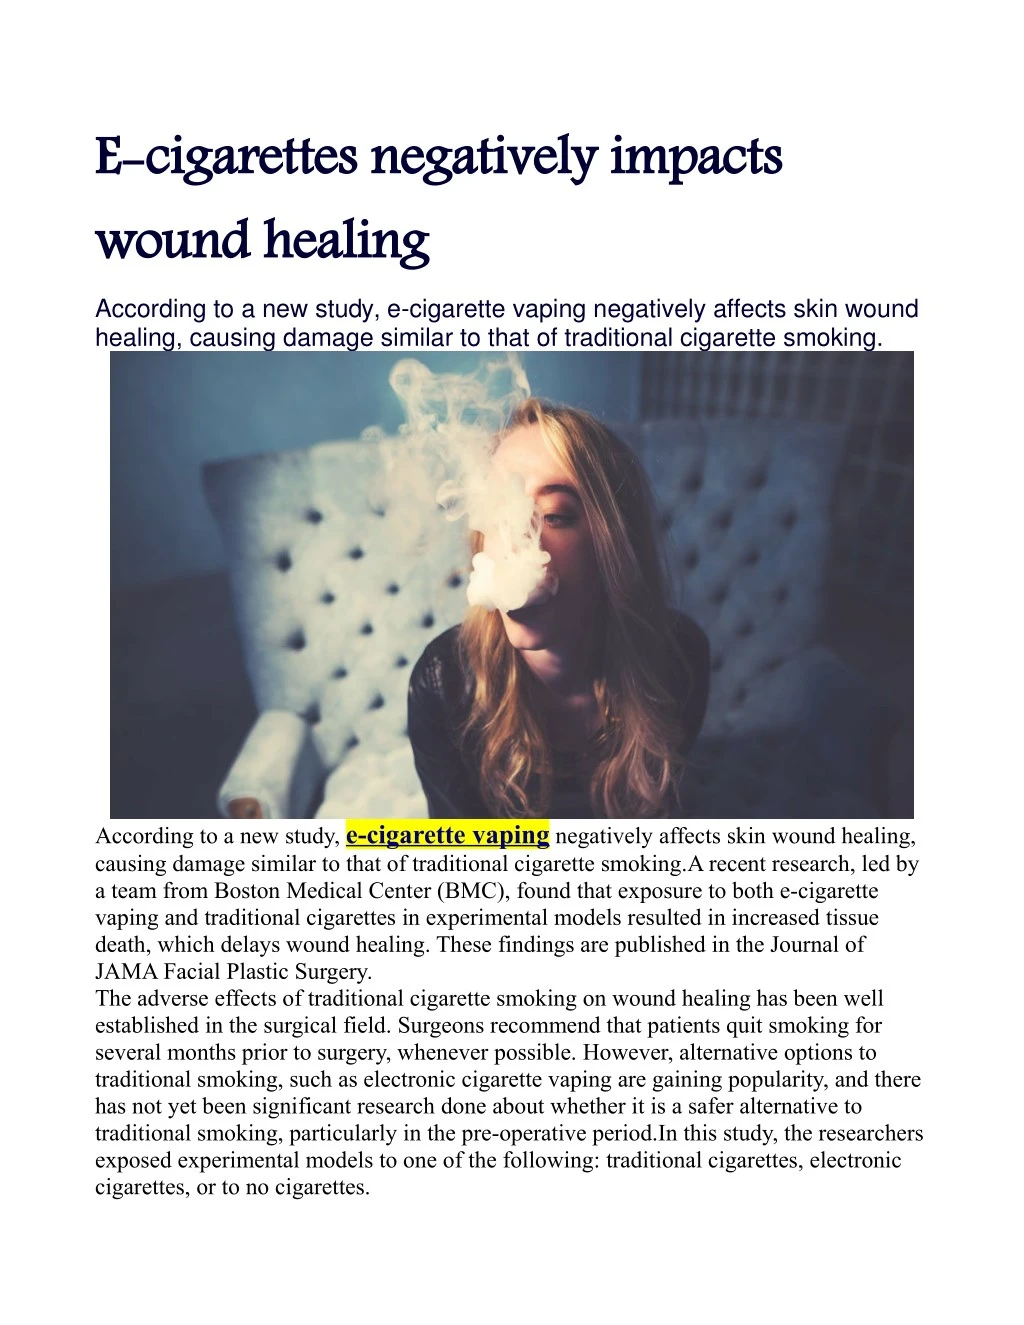 e cigarettes negatively impacts wound healing